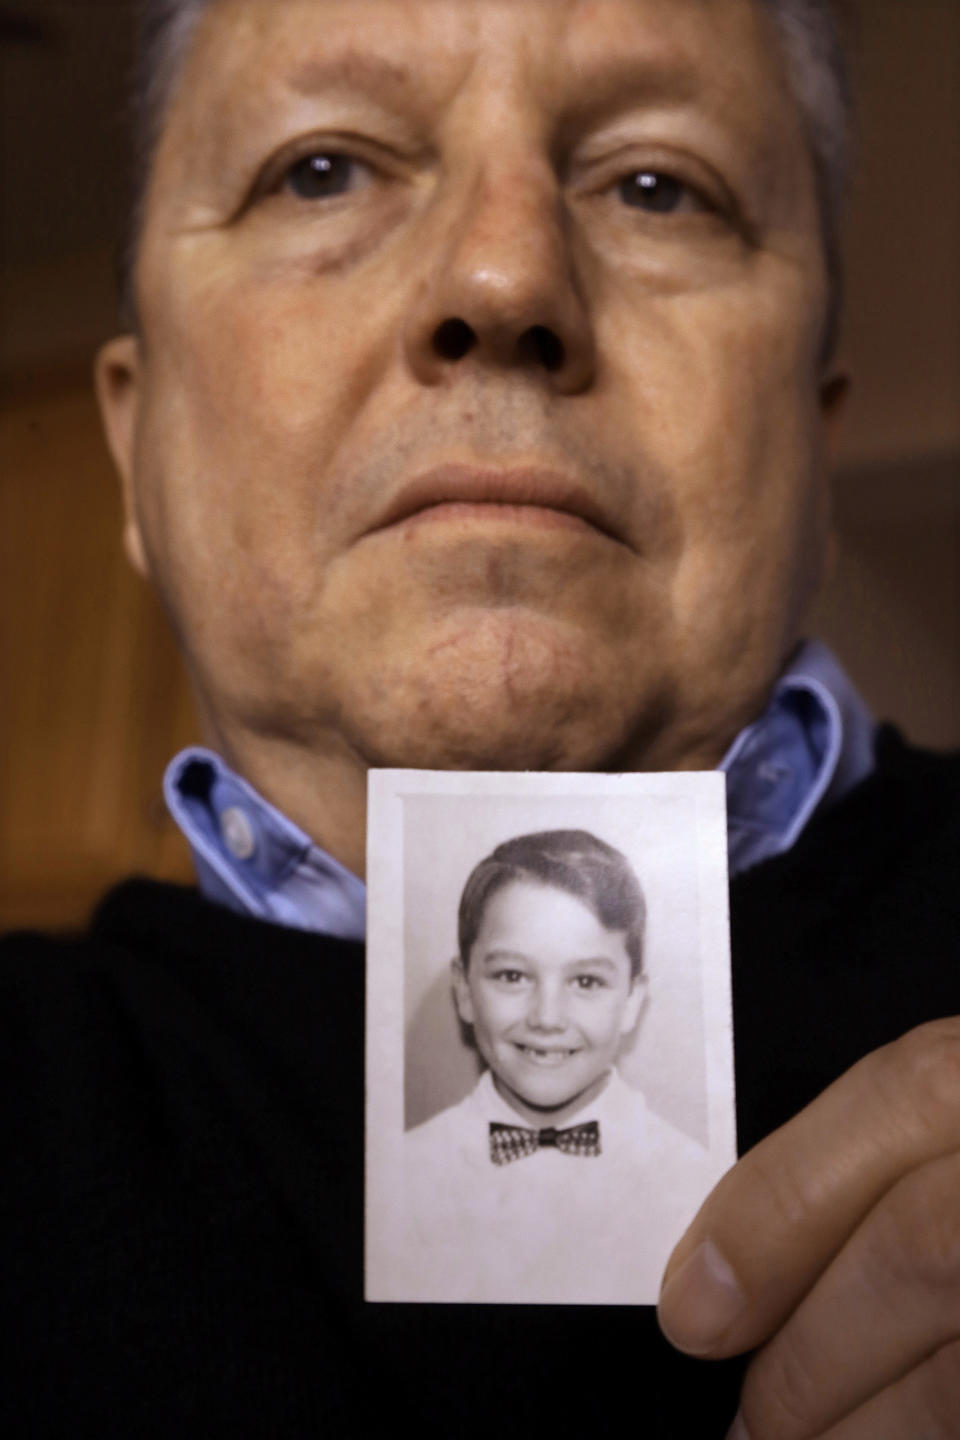 Joe Iacono, 62, who was abused in the early 1960s while he was a student at St. John Vianney Catholic School in North Lake, Ill., holds a photo of him taken in 1960 when he was 9-years-old, while talking about The Archdiocese of Chicago releasing thousands of pages documenting clergy sex abuse allegations to victims' attorneys who have for years fought to hold the Catholic Church accountable for its handling of such claims, at his home Wednesday, Jan. 15, 2014, in Springfield, Ill. (AP Photo/Seth Perlman)